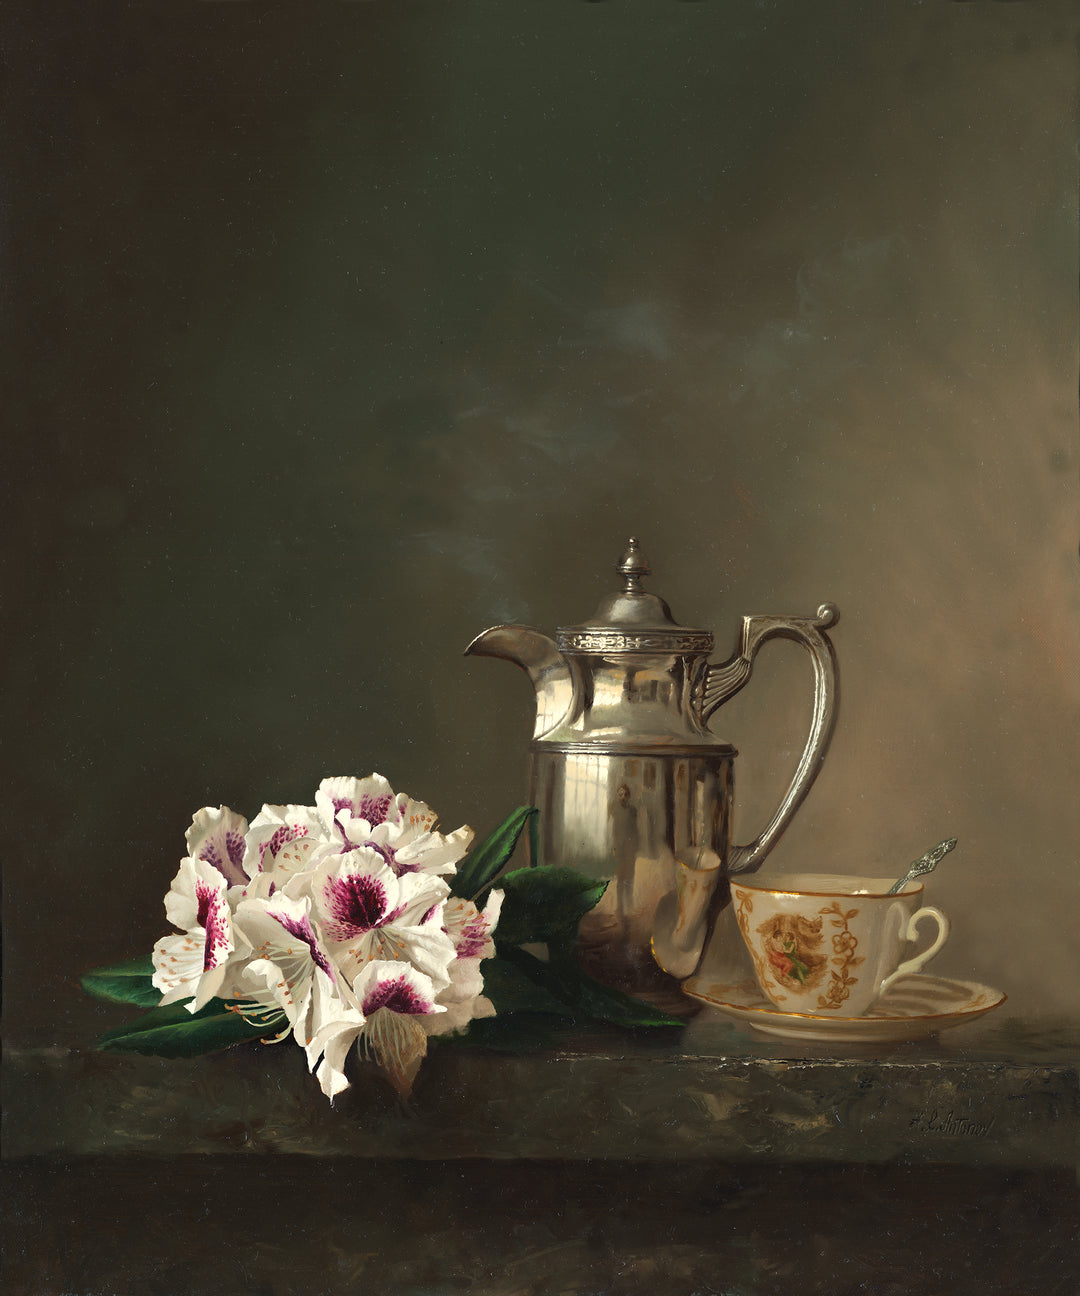 "Аrtist's Morning Coffee" 20x24 inches